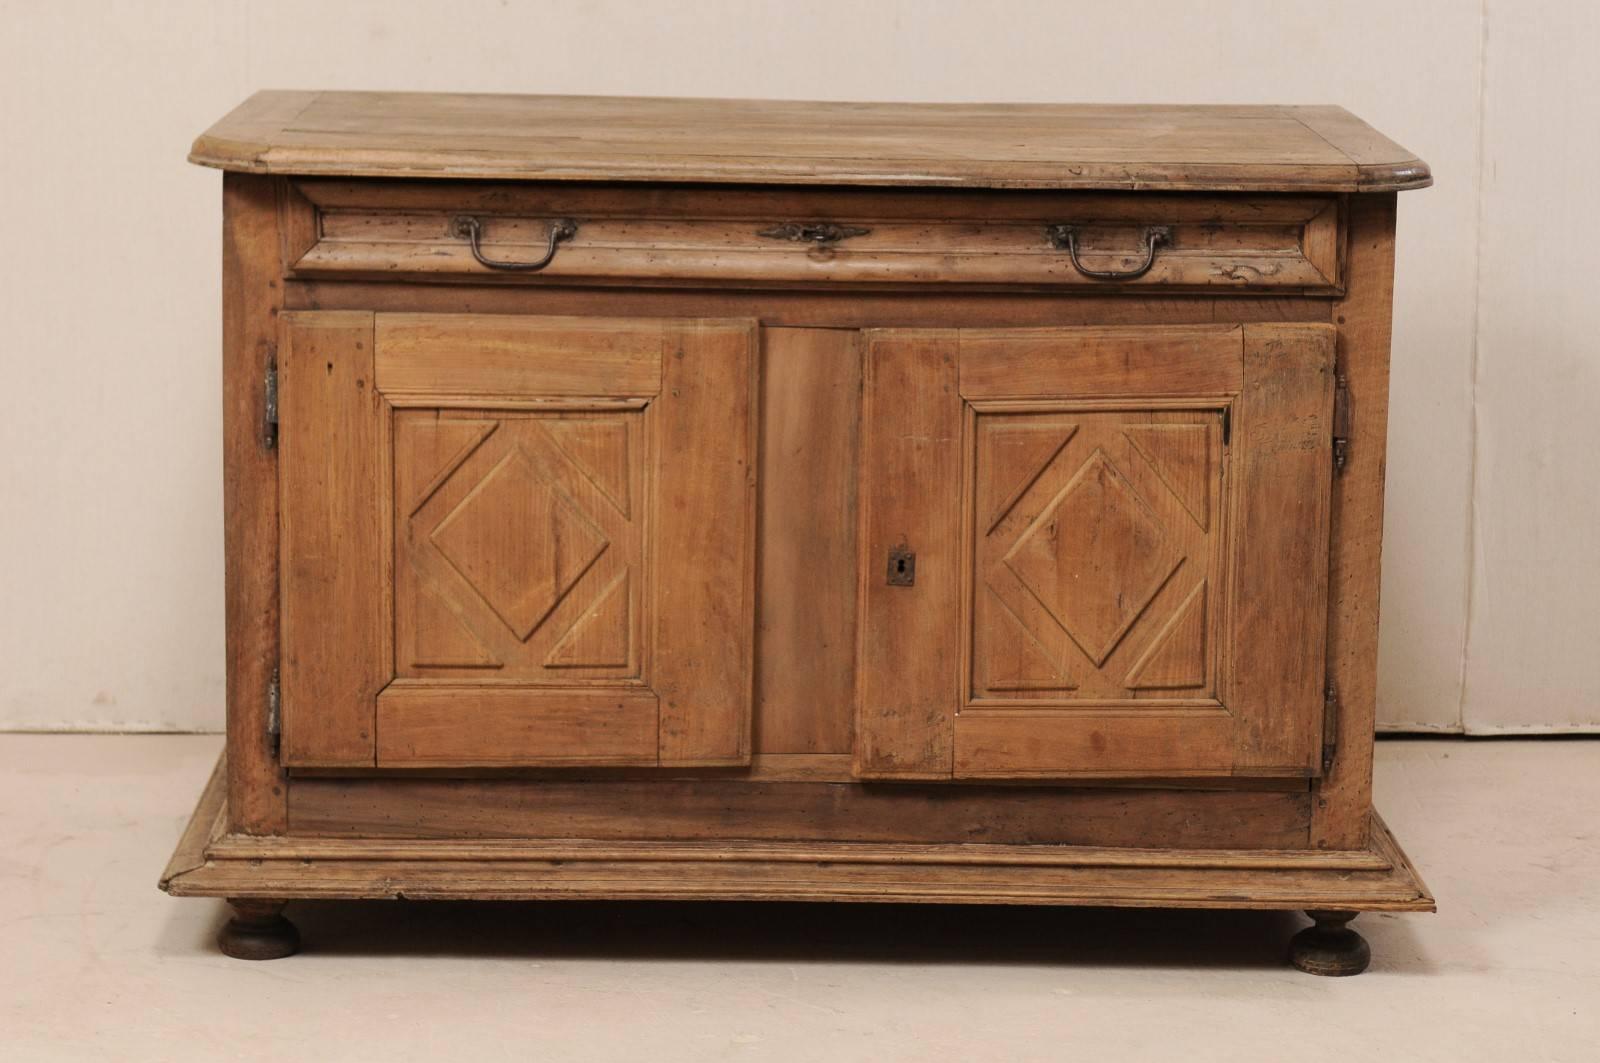 An Italian 18th century two-door credenza of walnut wood. This antique cabinet from Italy features a slightly overhanging top with rounded front corners, atop a slender full length drawer and two doors below which have diamond carved recessed panel